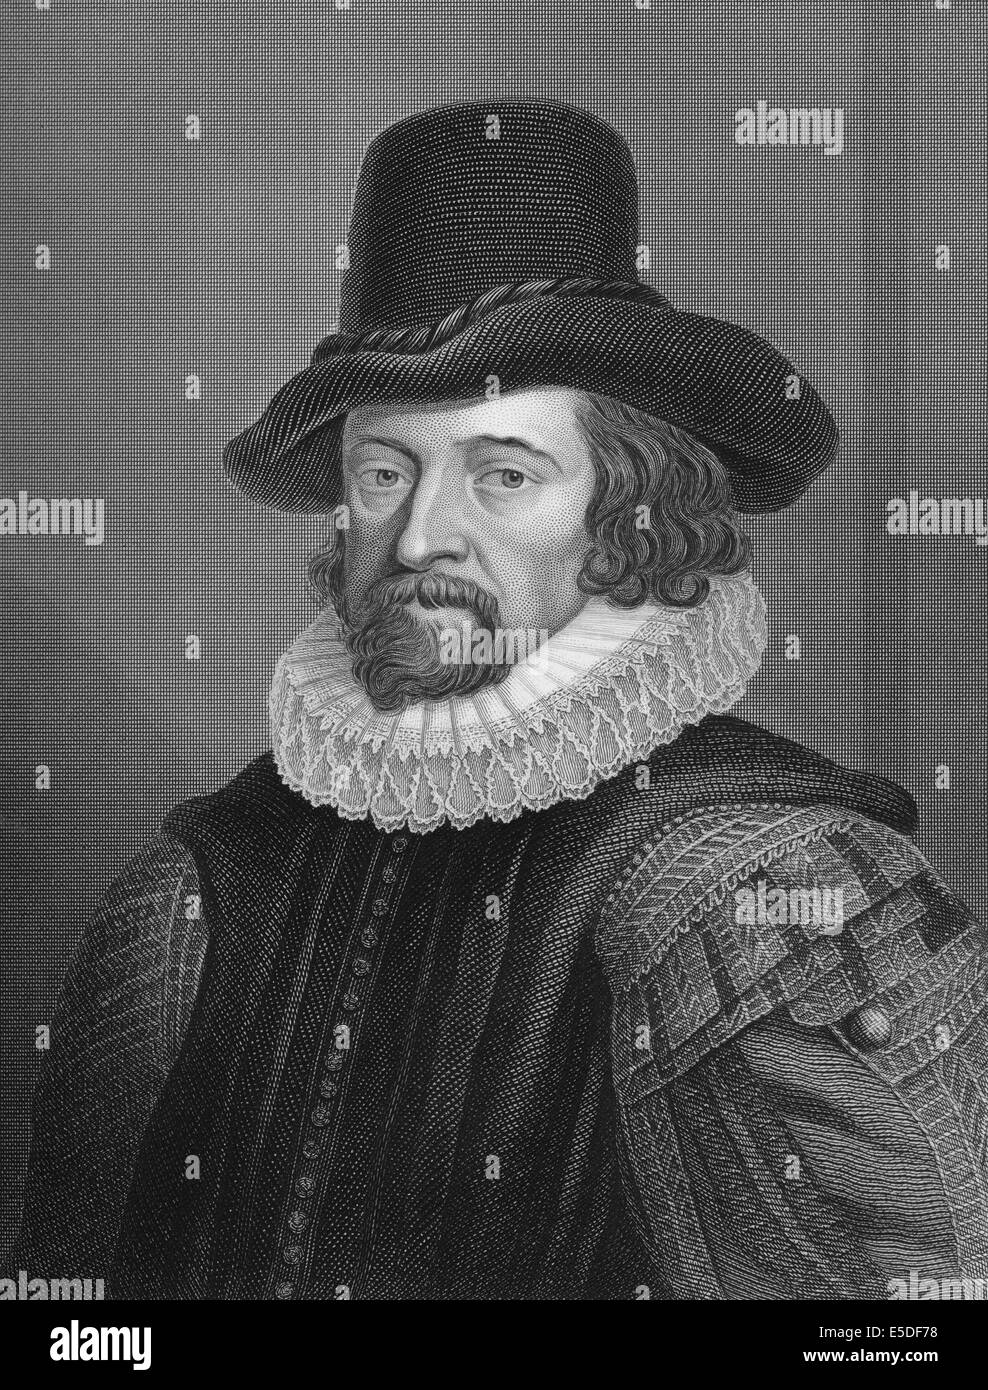 Steel engraving, c. 1860, Francis Bacon or Baron Baco of Verulam, 1561 - 1626, an English philosopher, statesman and scientist, Stock Photo